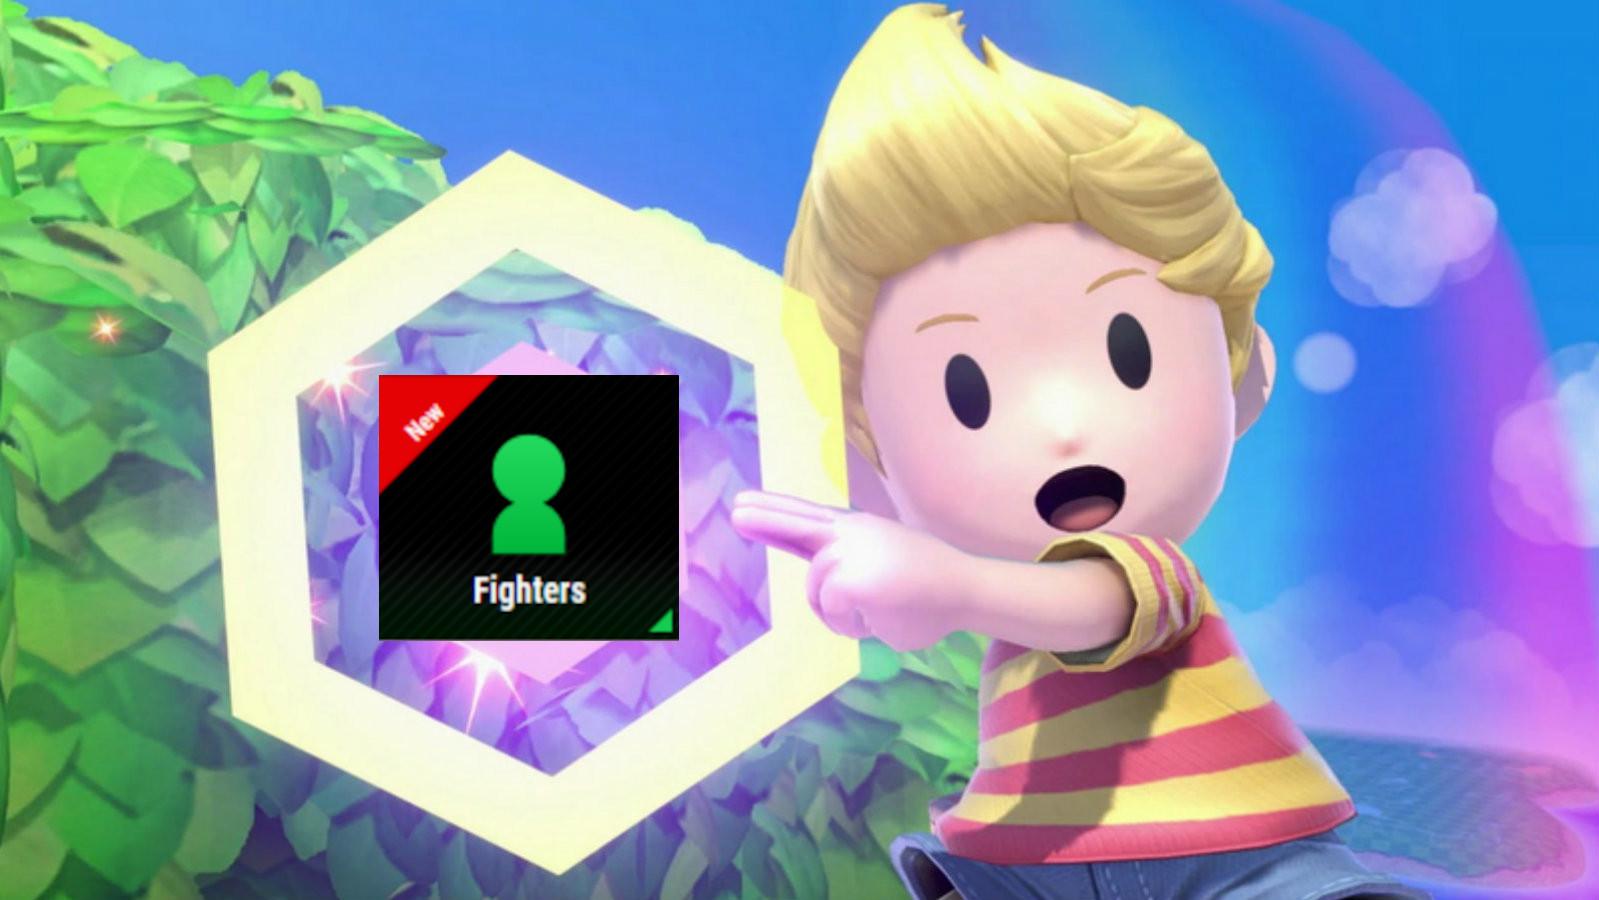 Lucas points at new Smash Ultimate DLC